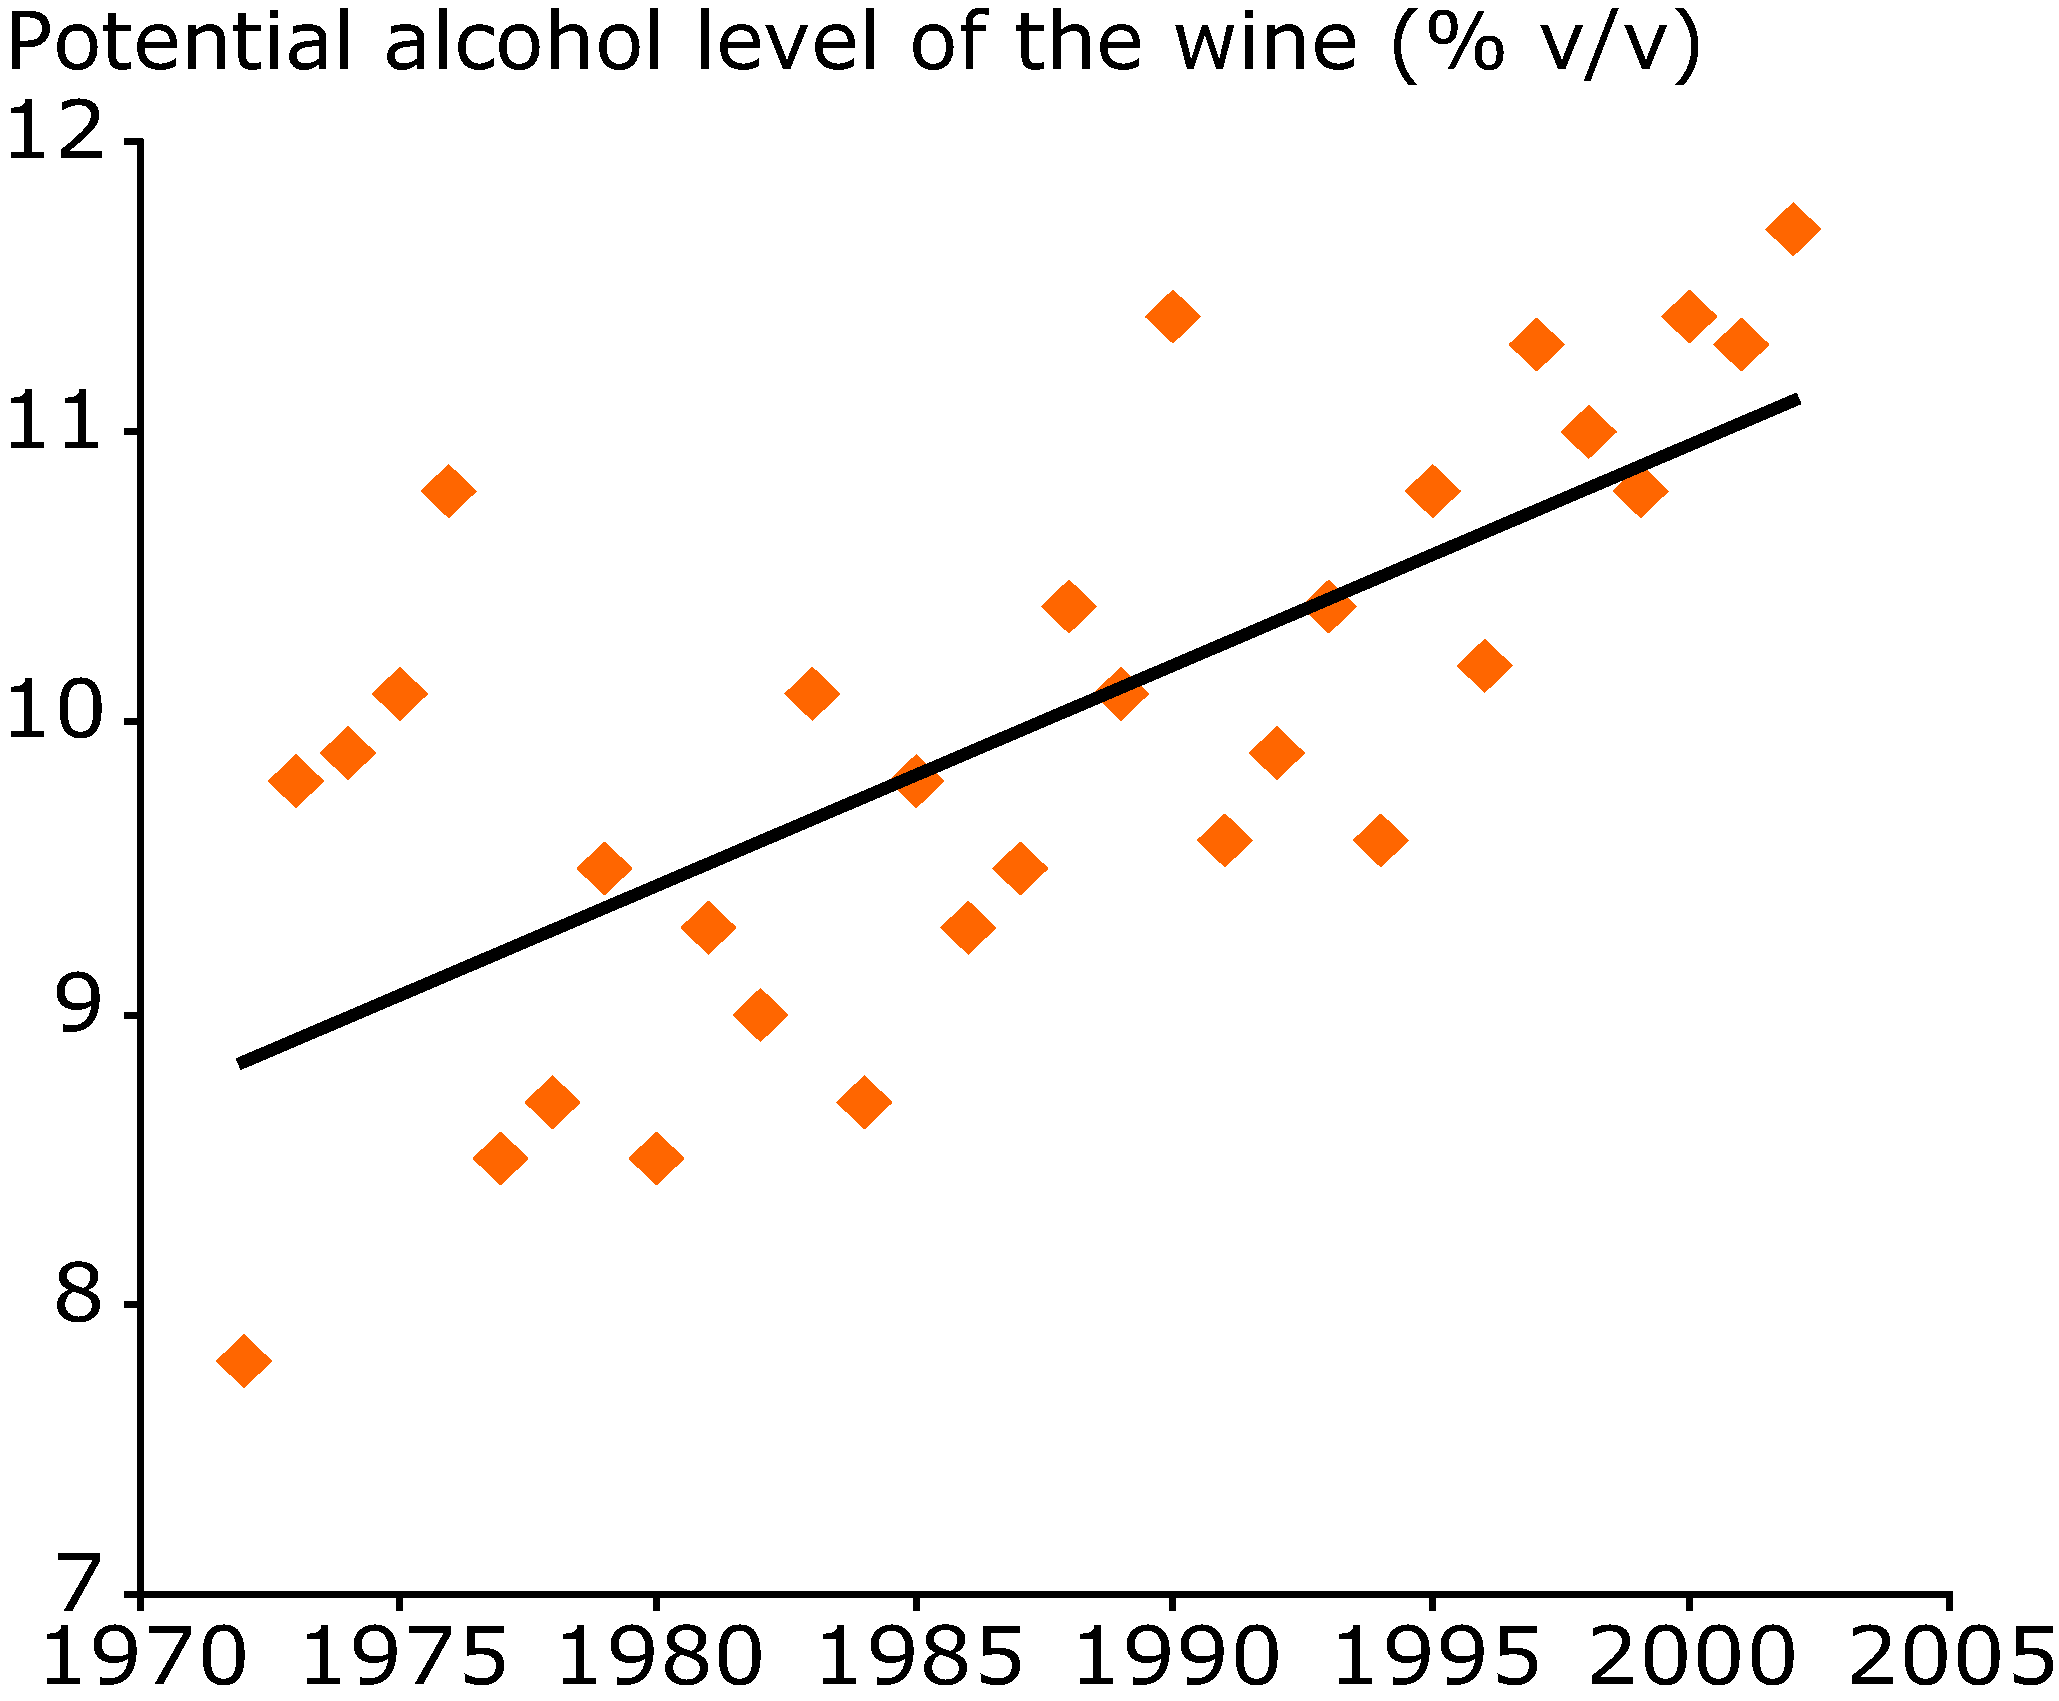 Potential alcohol level at harvest for Riesling in Alsace (France) 1972-2003